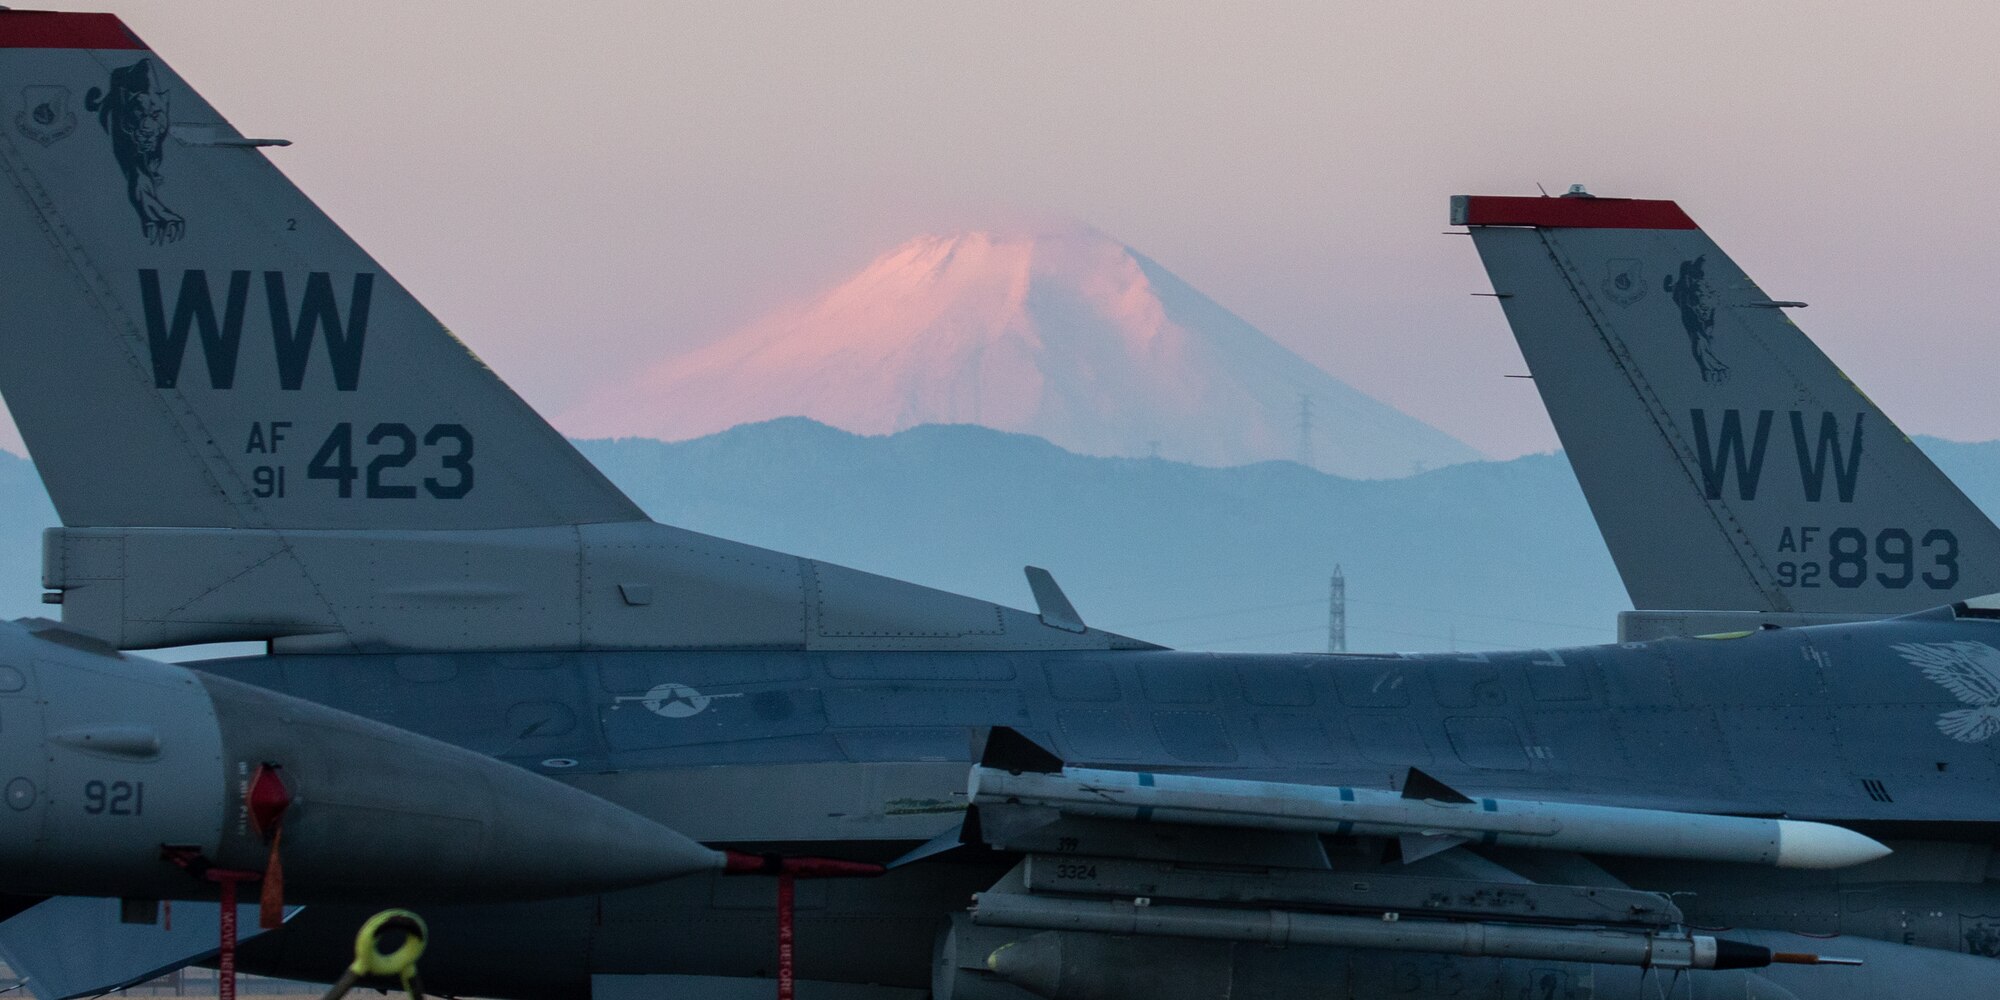 Two F-16 wings frame Mt. Fuji in the background.